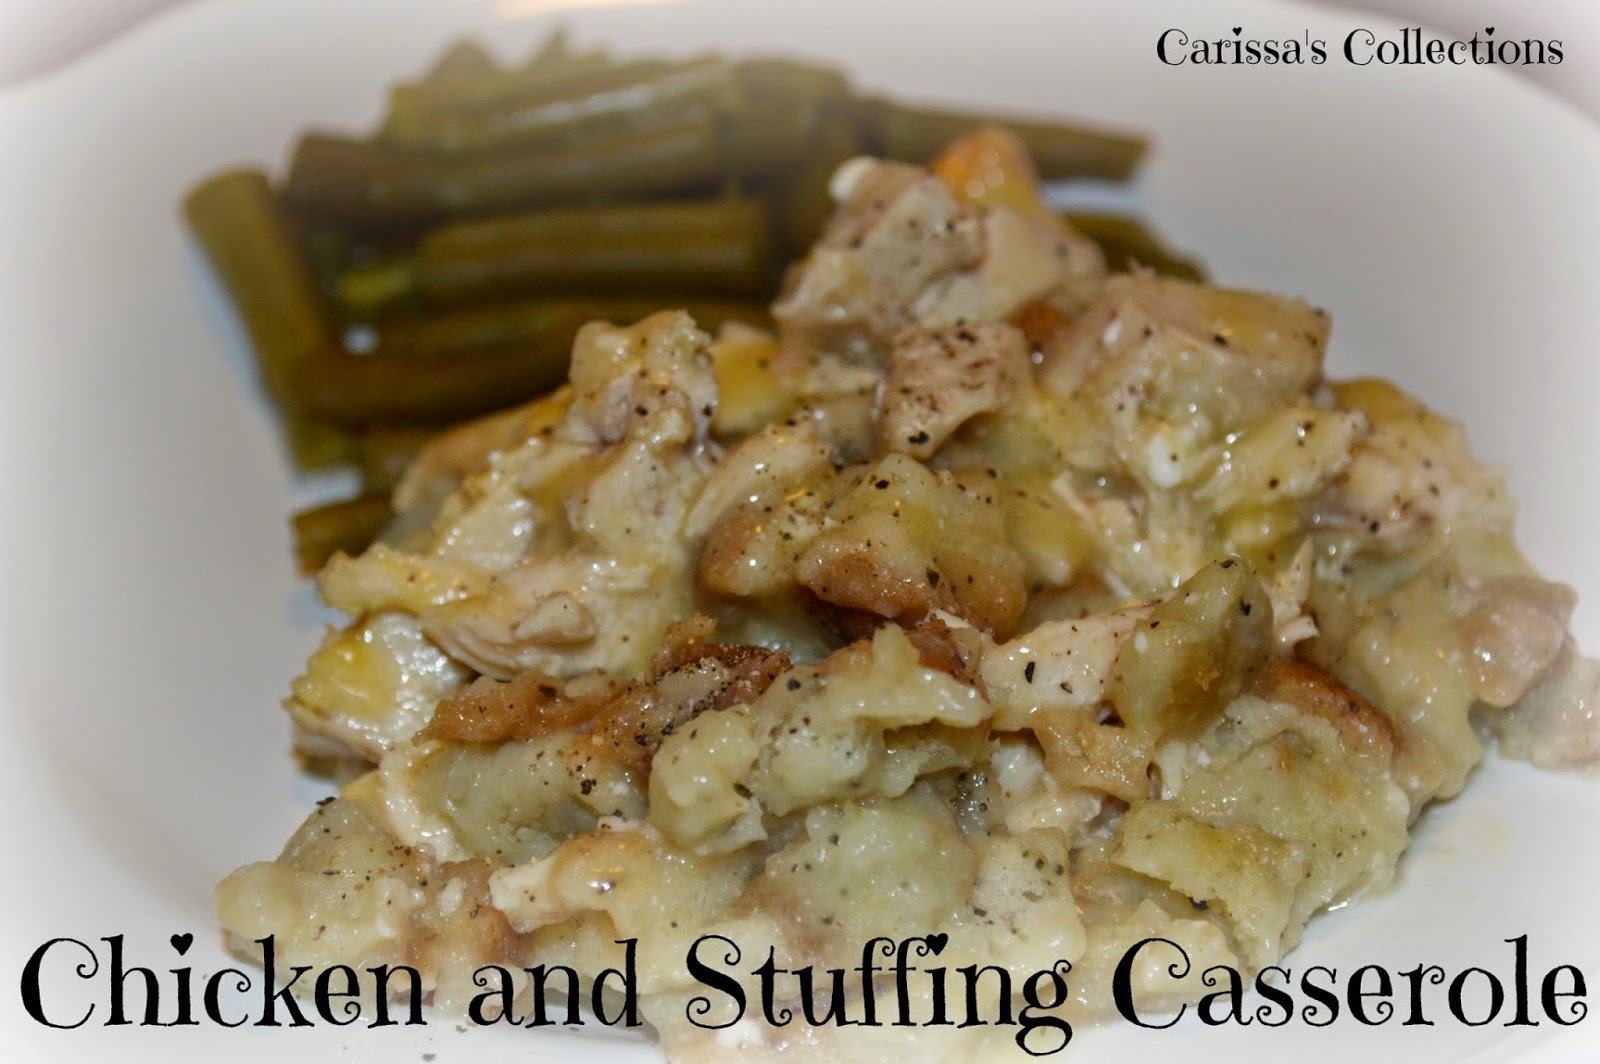 Carissa's Collections: Chicken and Stuffing Casserole